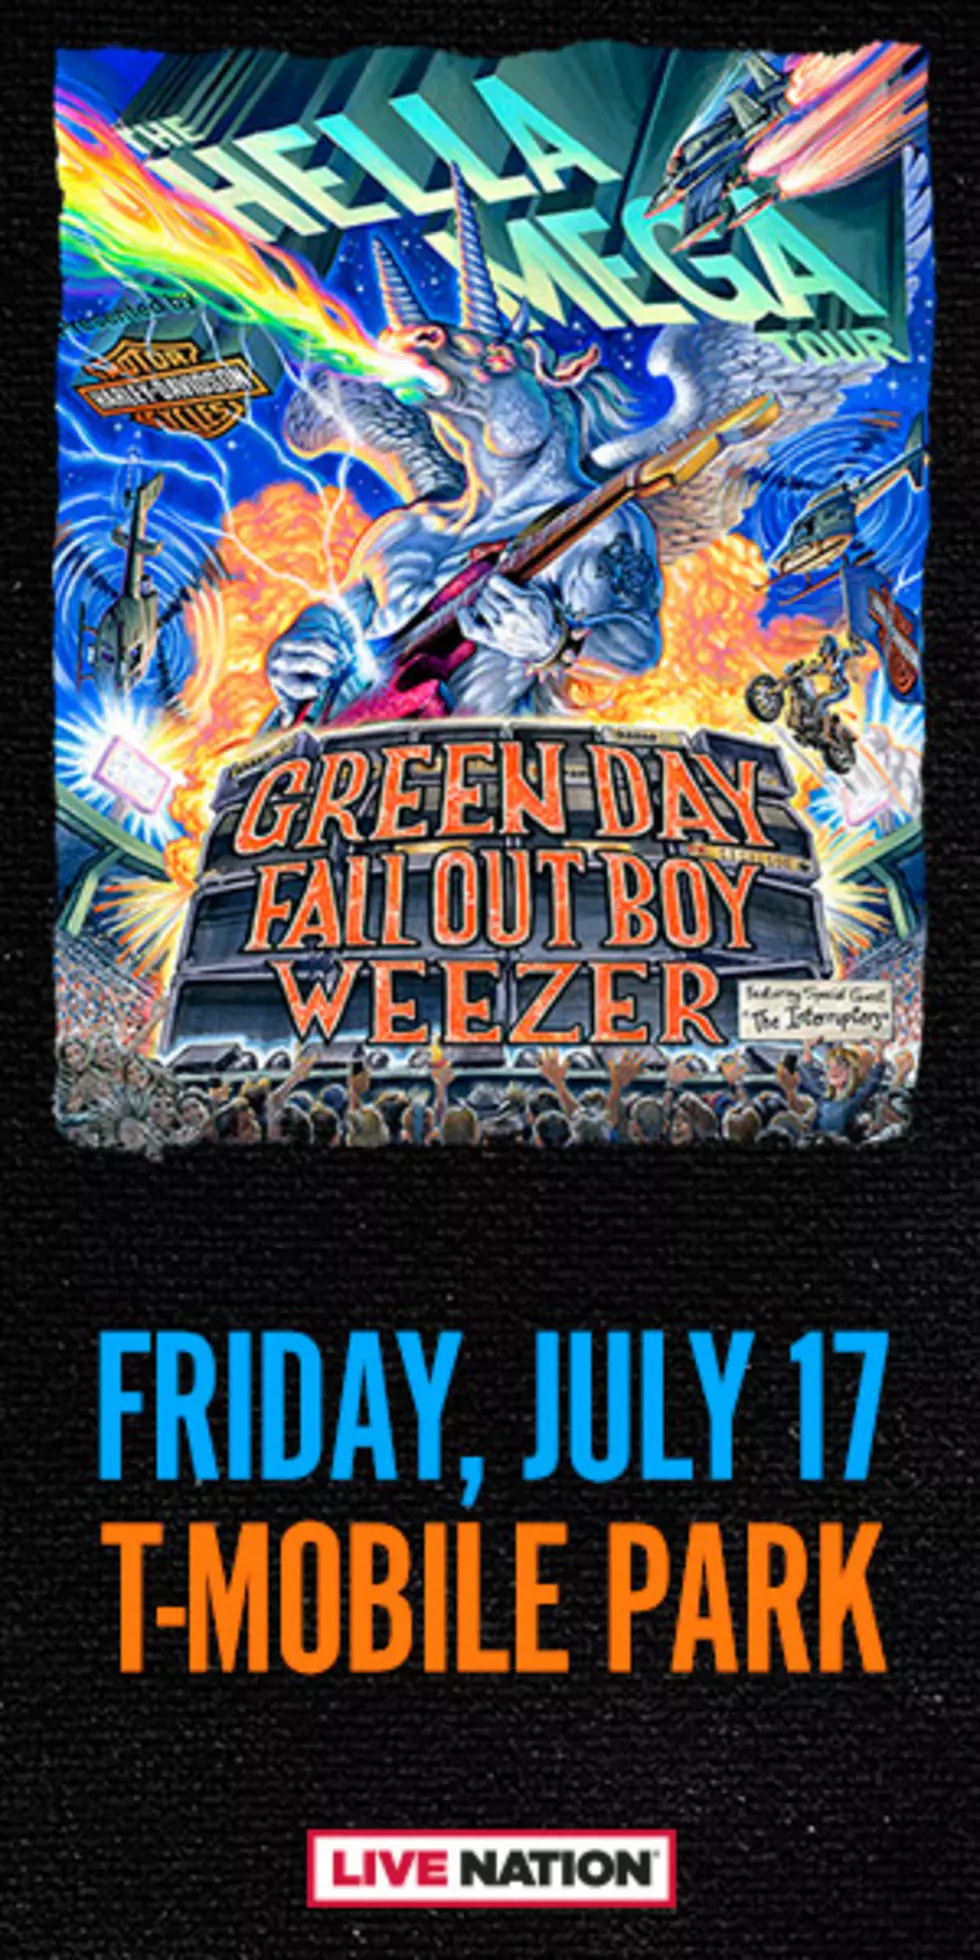 Green Day, Weezer & Fall Out Boy Announce Seattle Gig